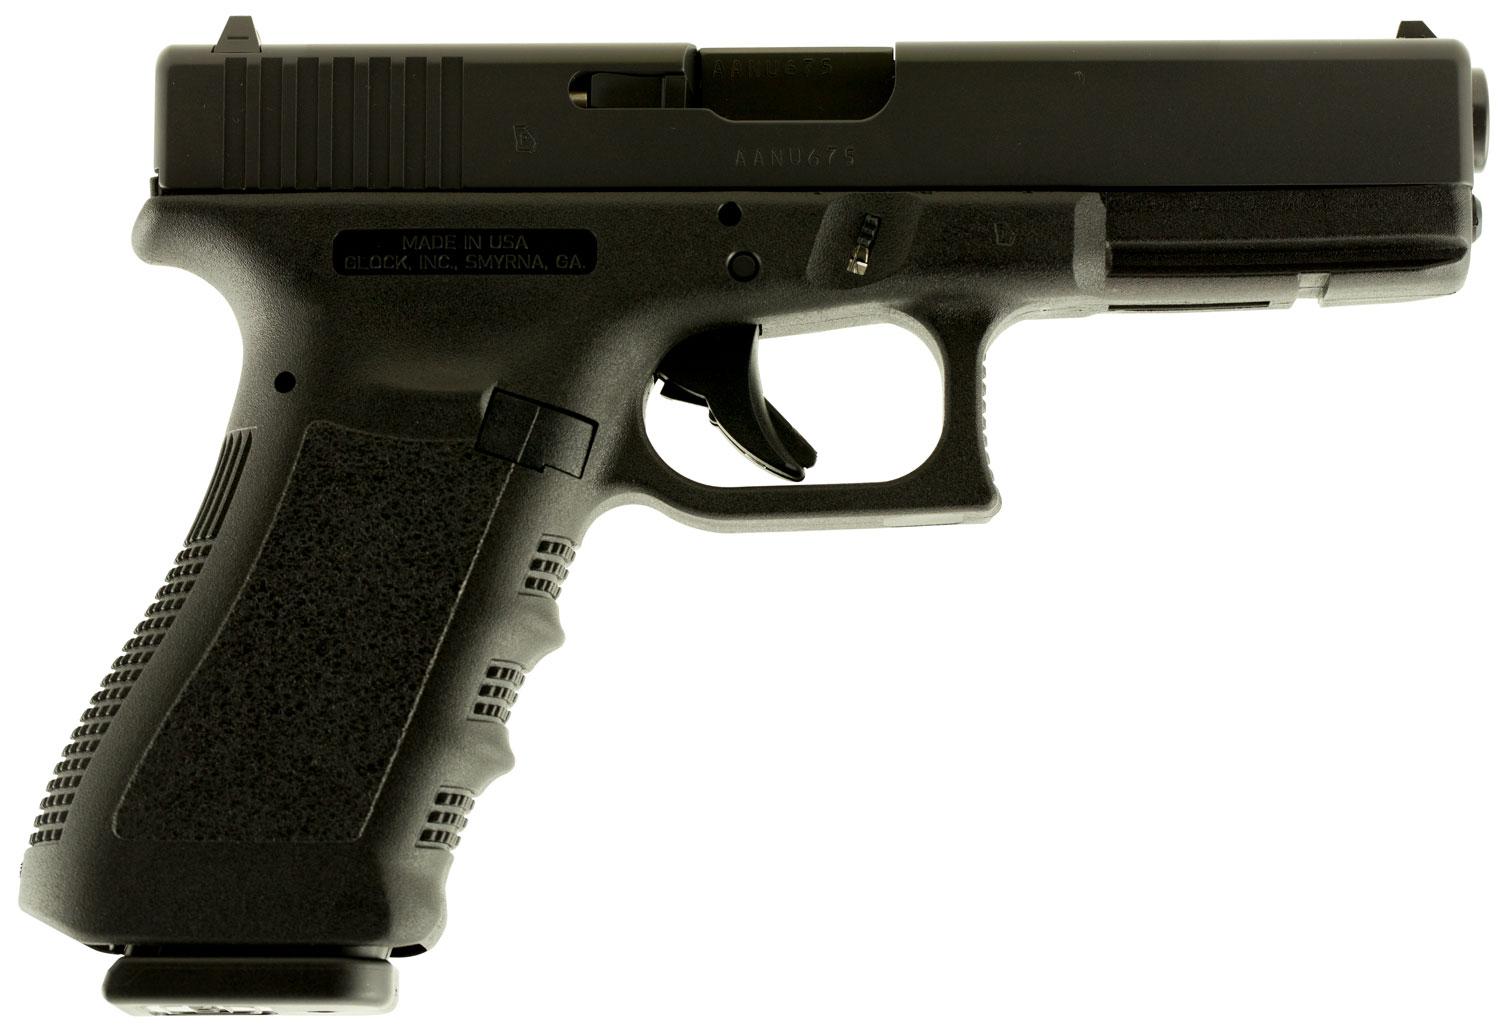  Glock 22 40sw 15rd Us Made